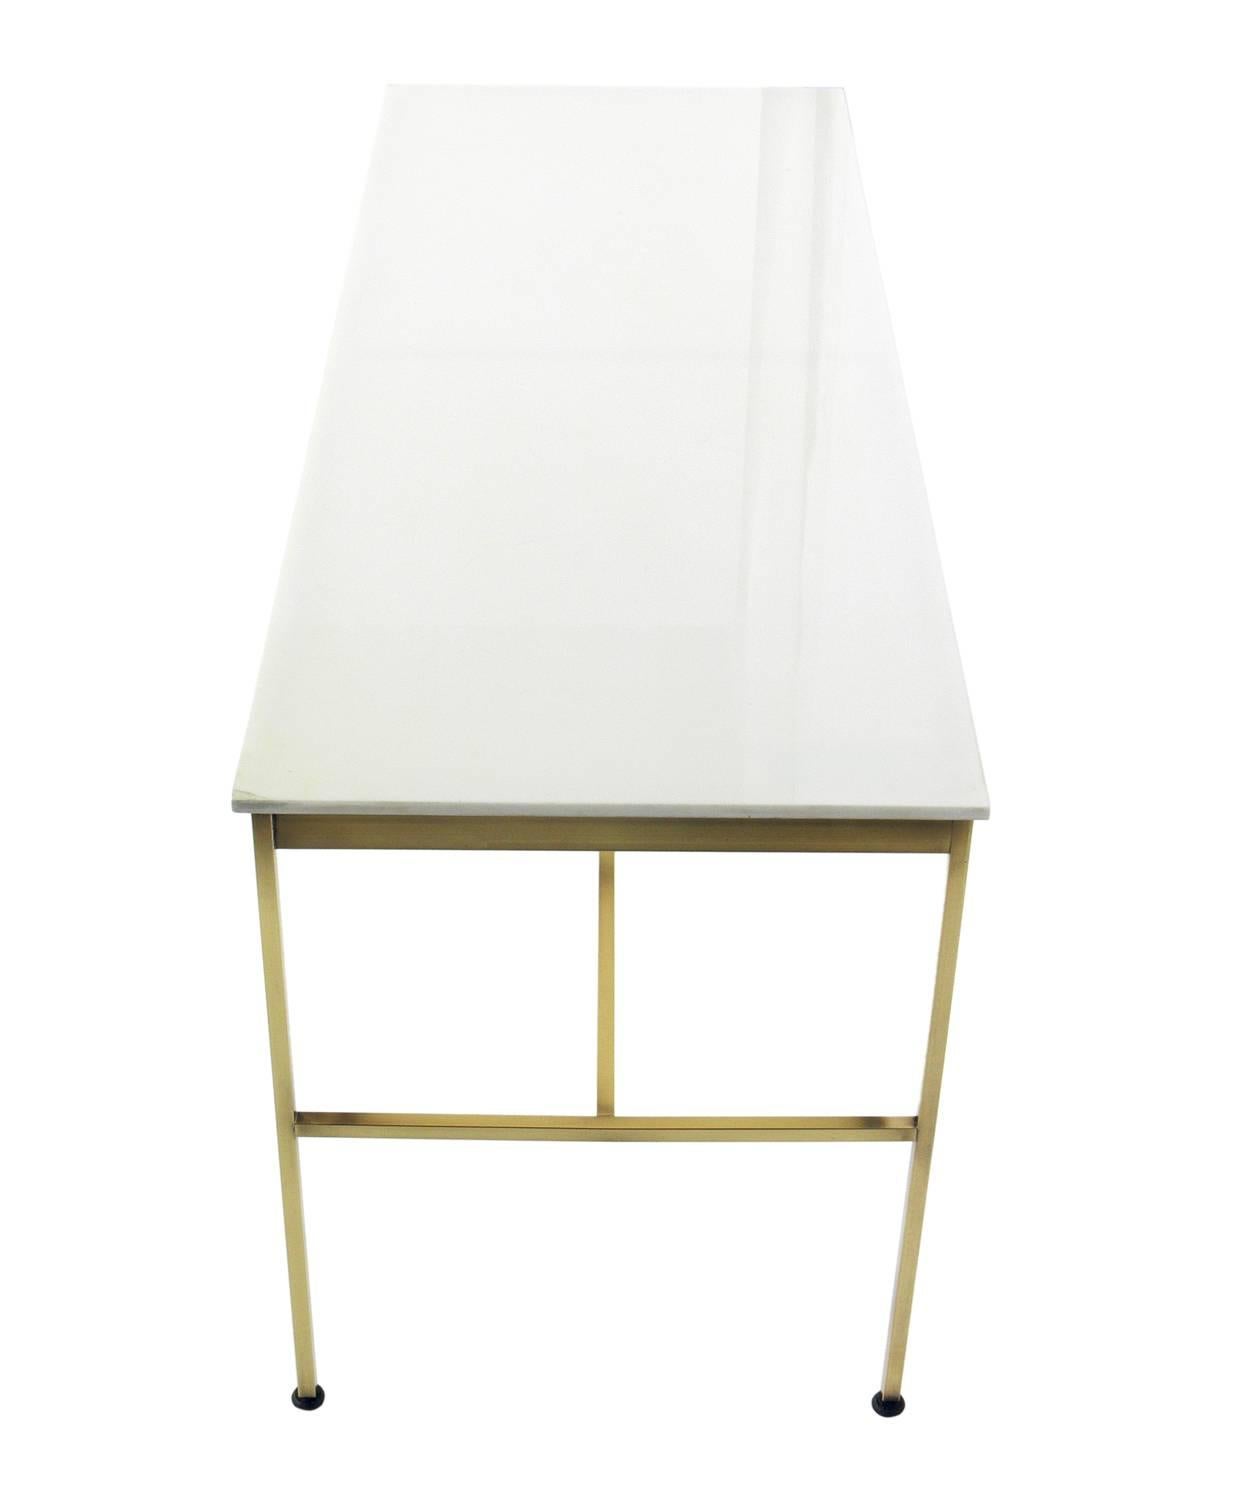 Mid-Century Modern Modernist Brass and Milk Glass Console by Paul McCobb